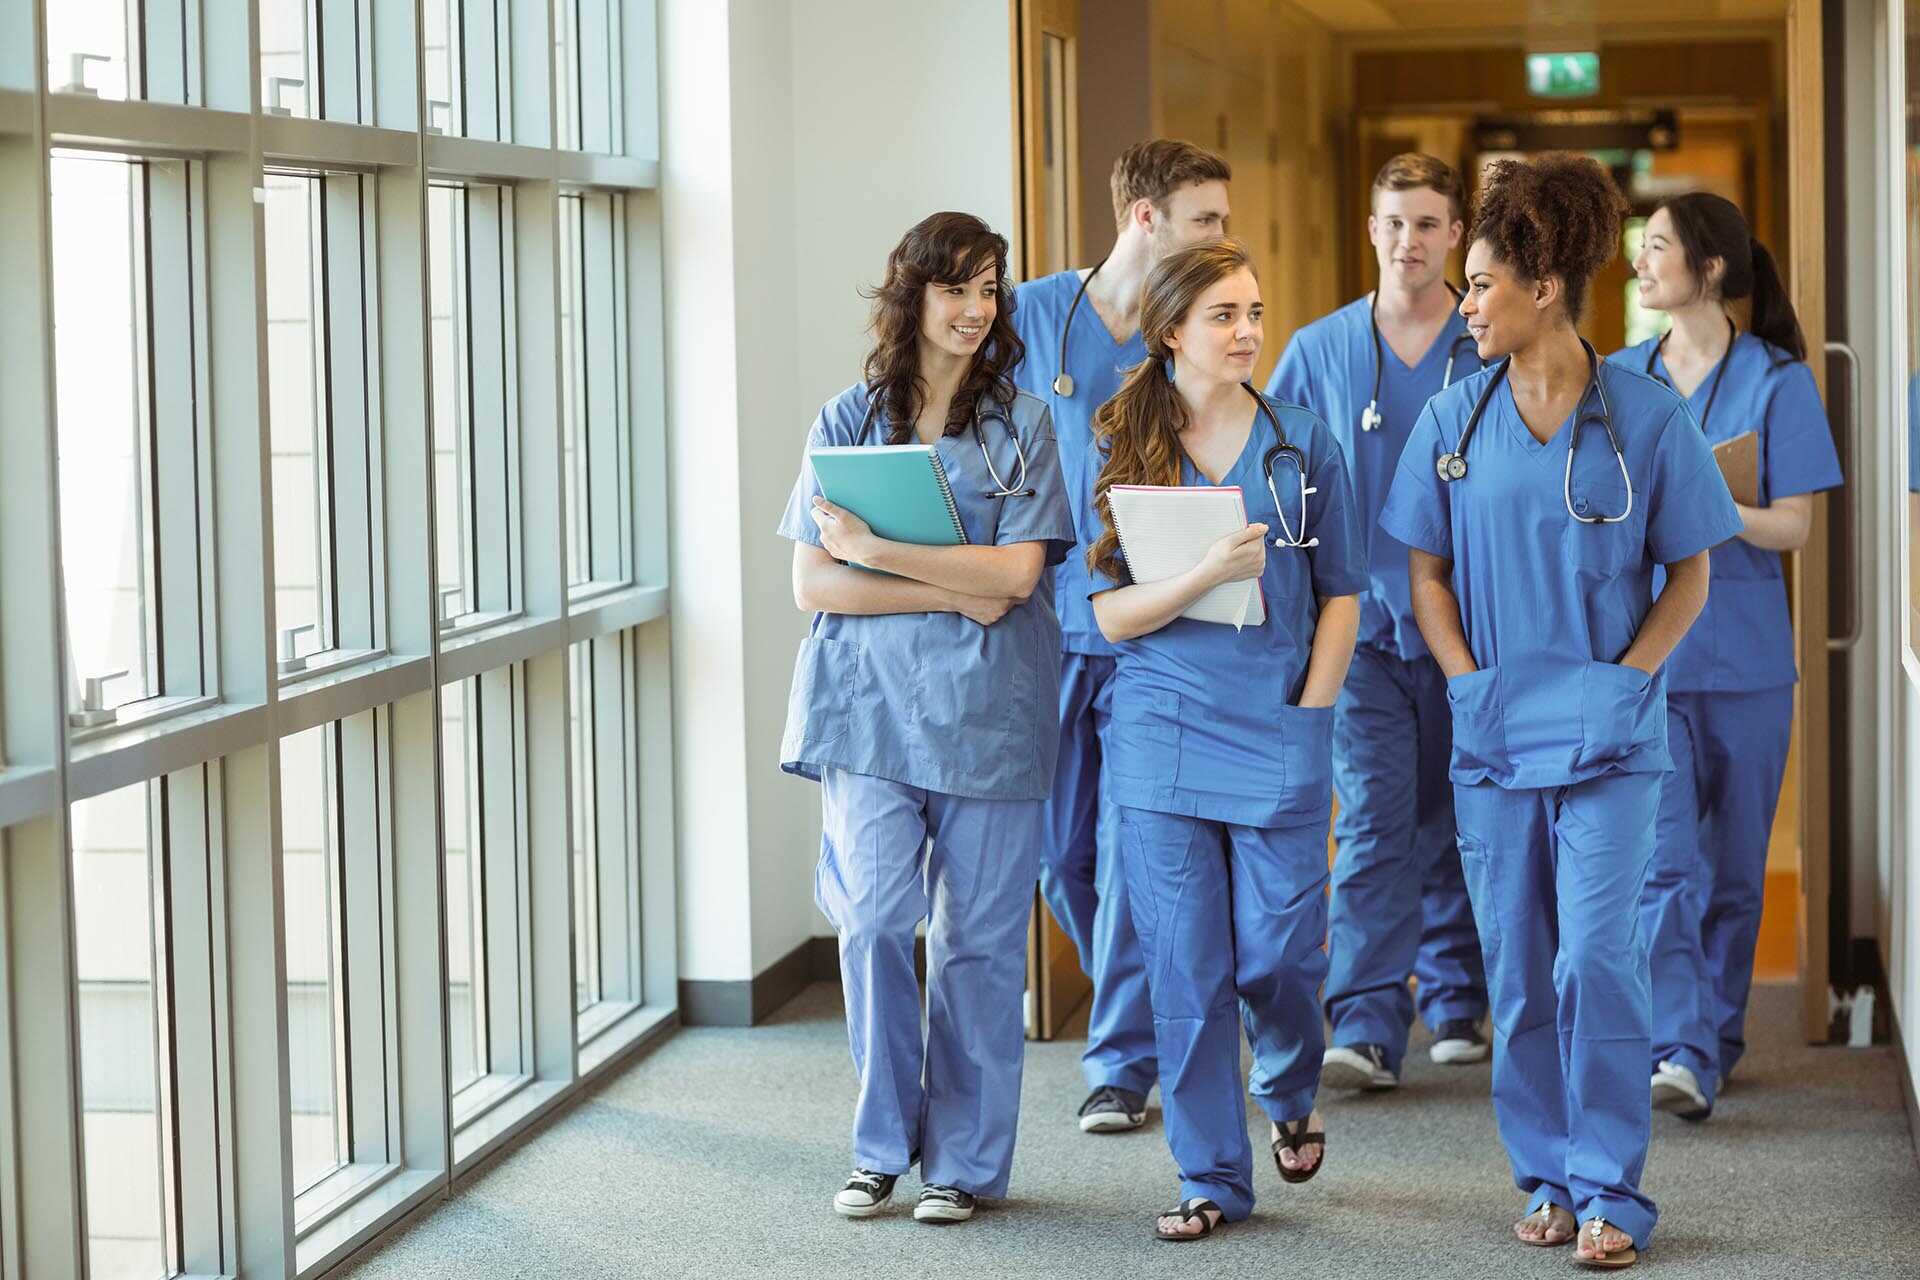 Group of medical students walking in a corridor